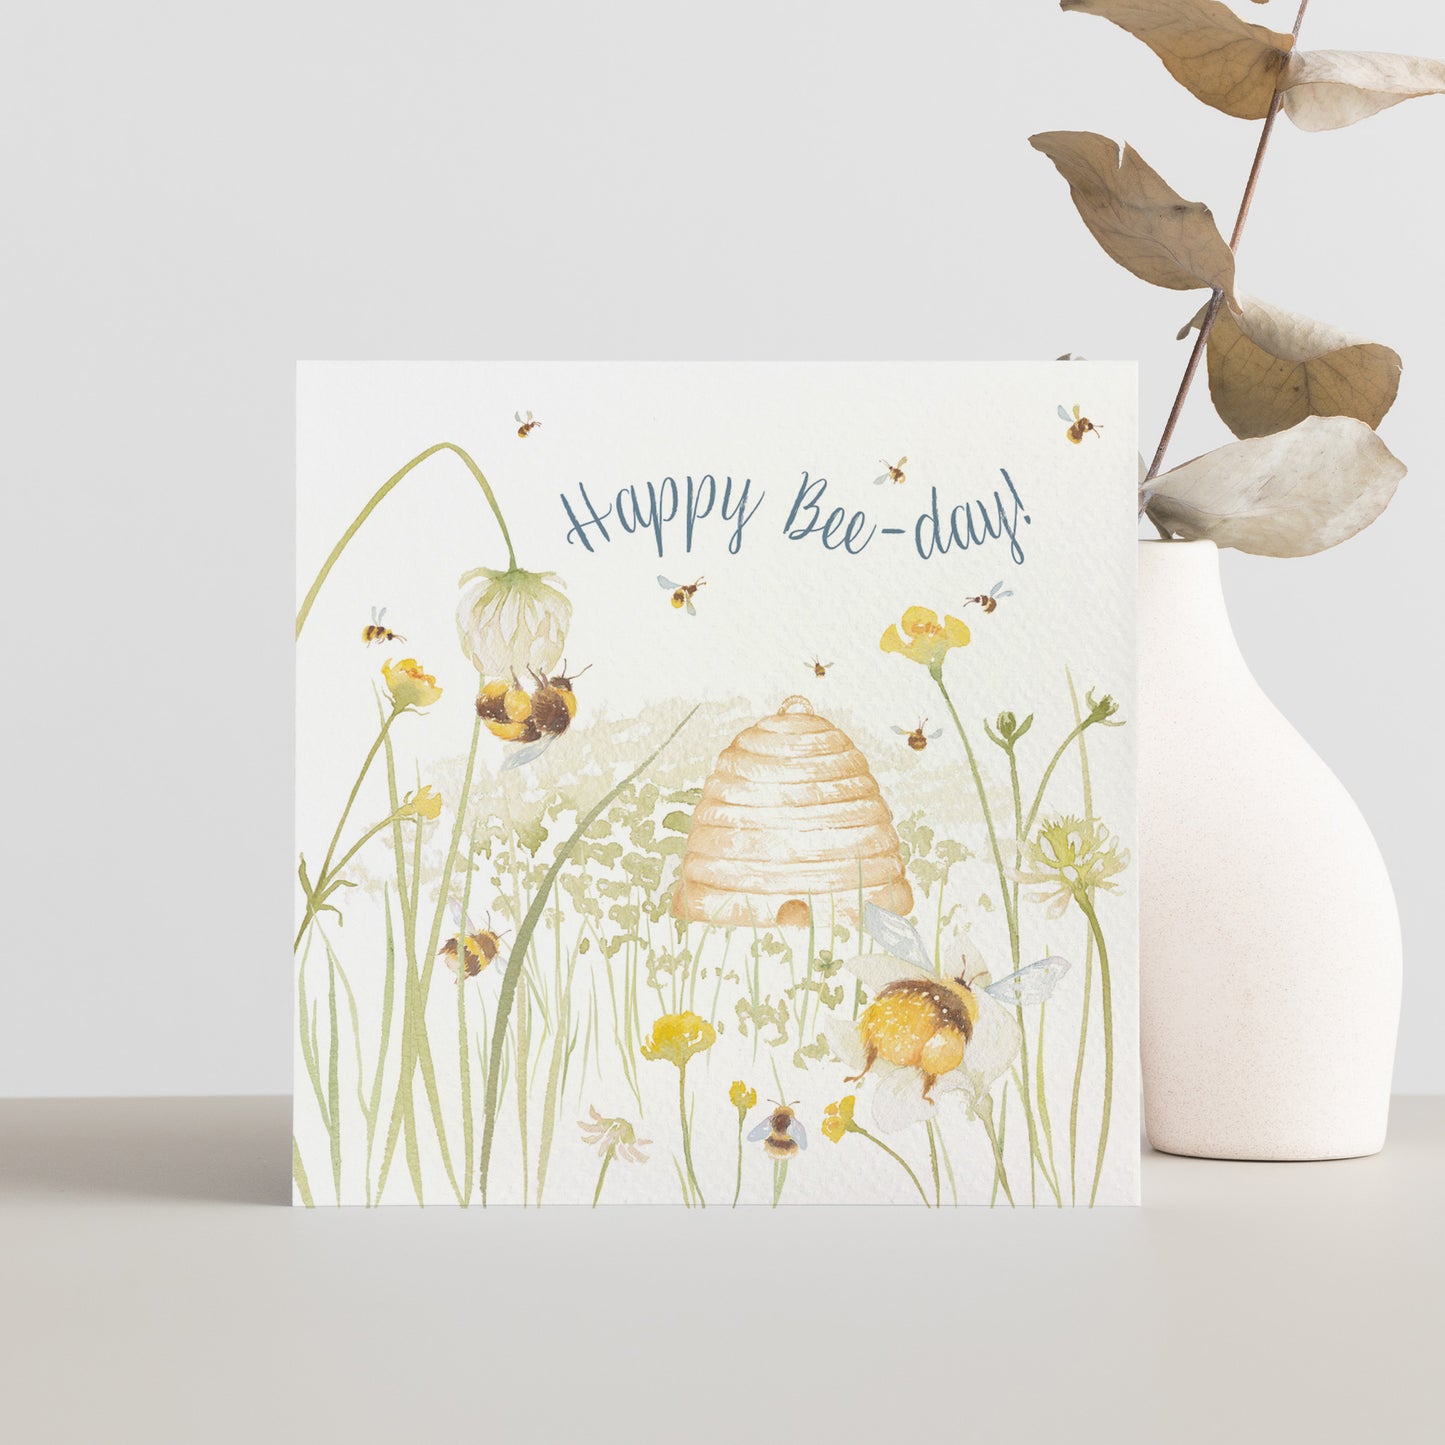 A greetings card reading Happy Bee-day in dark blue text above a buttercup meadow full of bees around a traditional bee hive in a watercolour style.